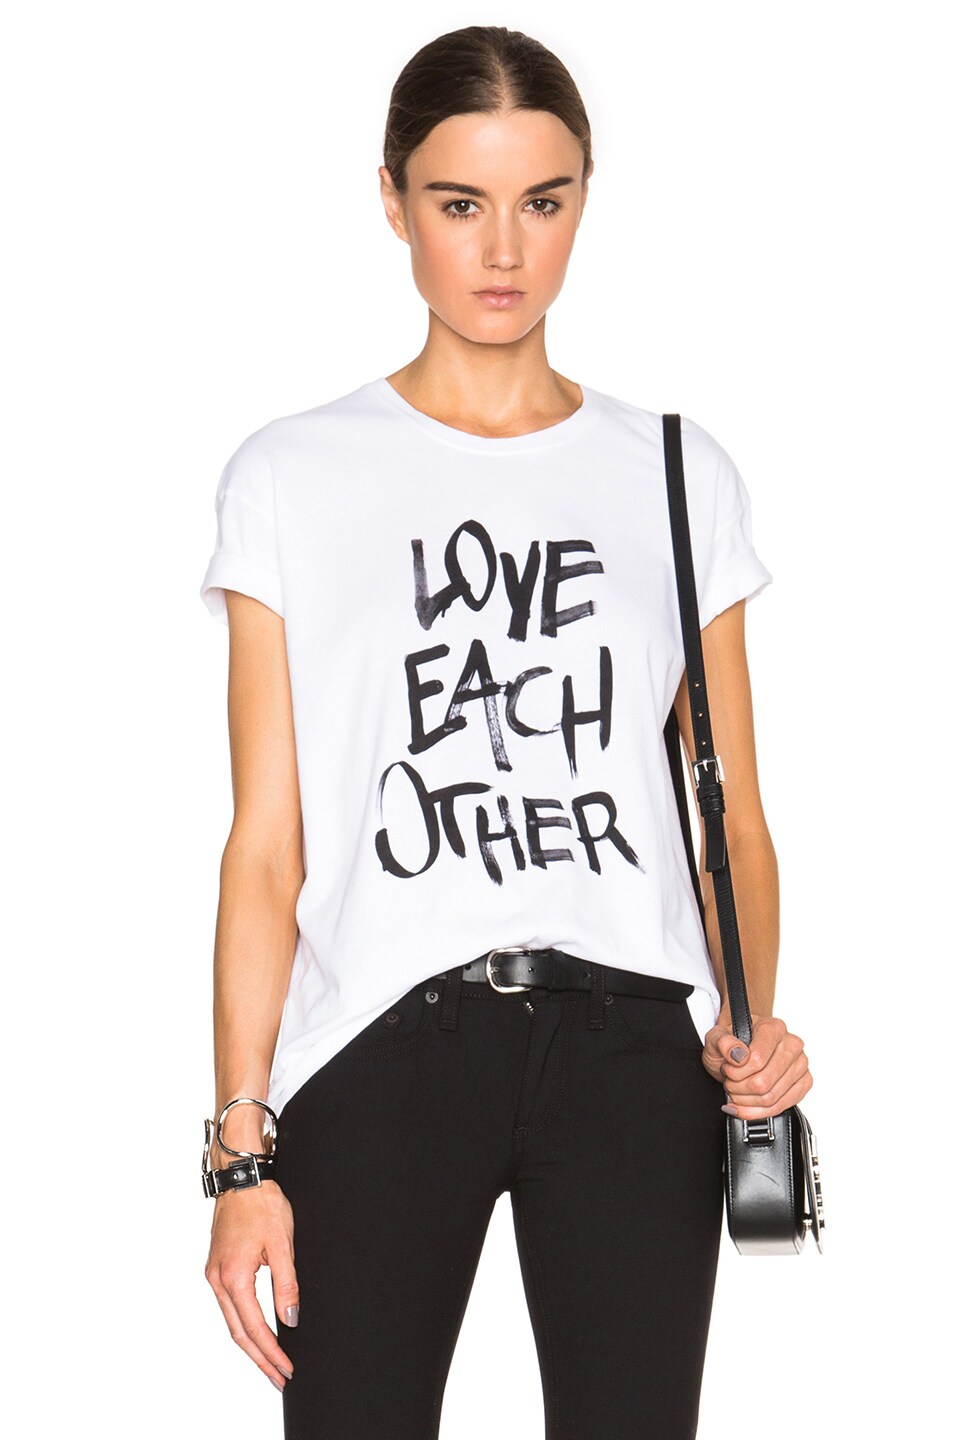 Image 1 of EACH x OTHER Love Each Other Tee in Black, Navy & White